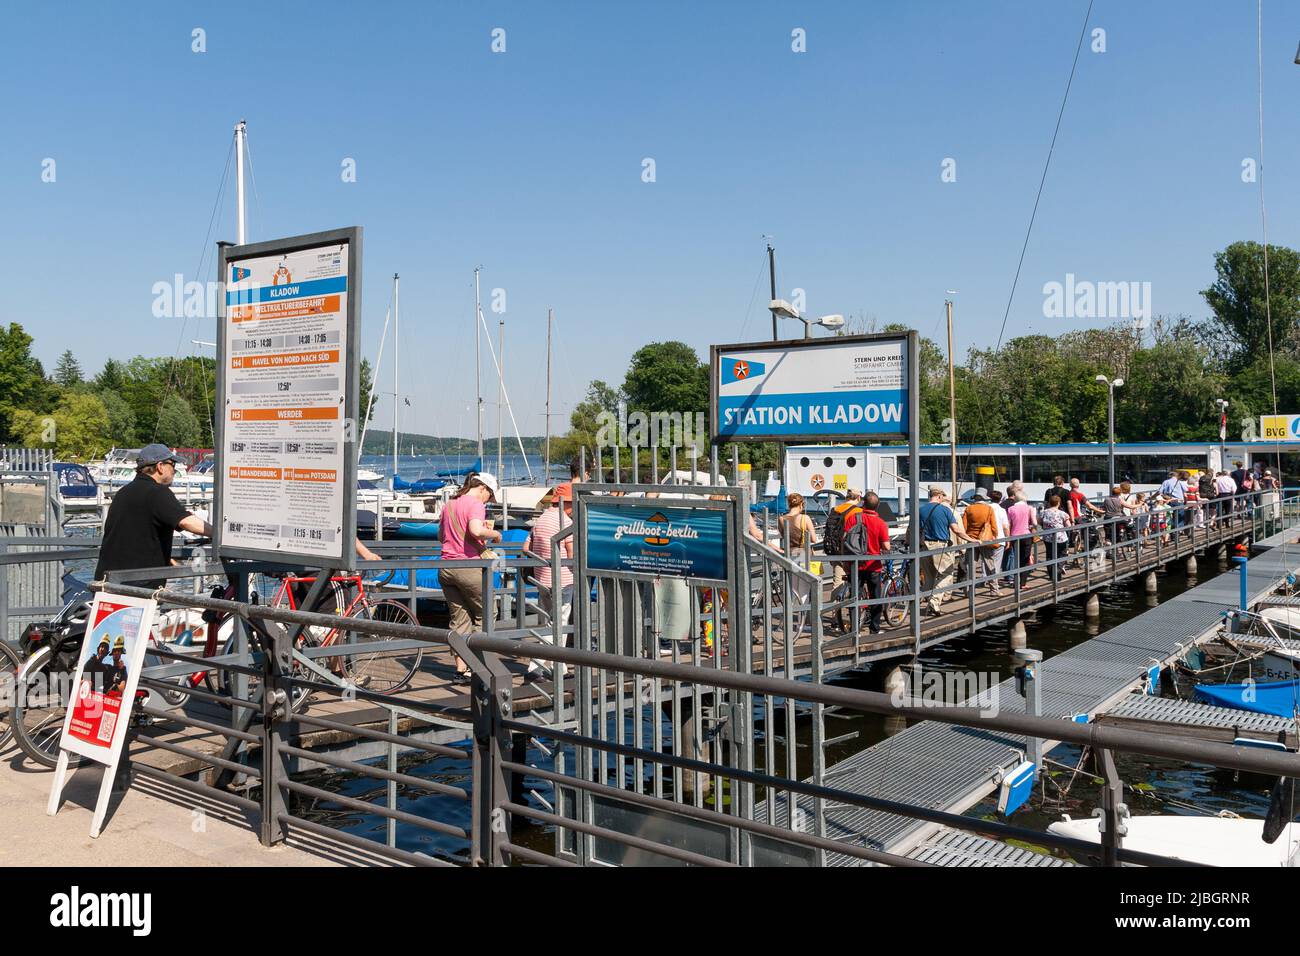 A queue of people waiting for the ferry from Kladow to Wansee Stock Photo